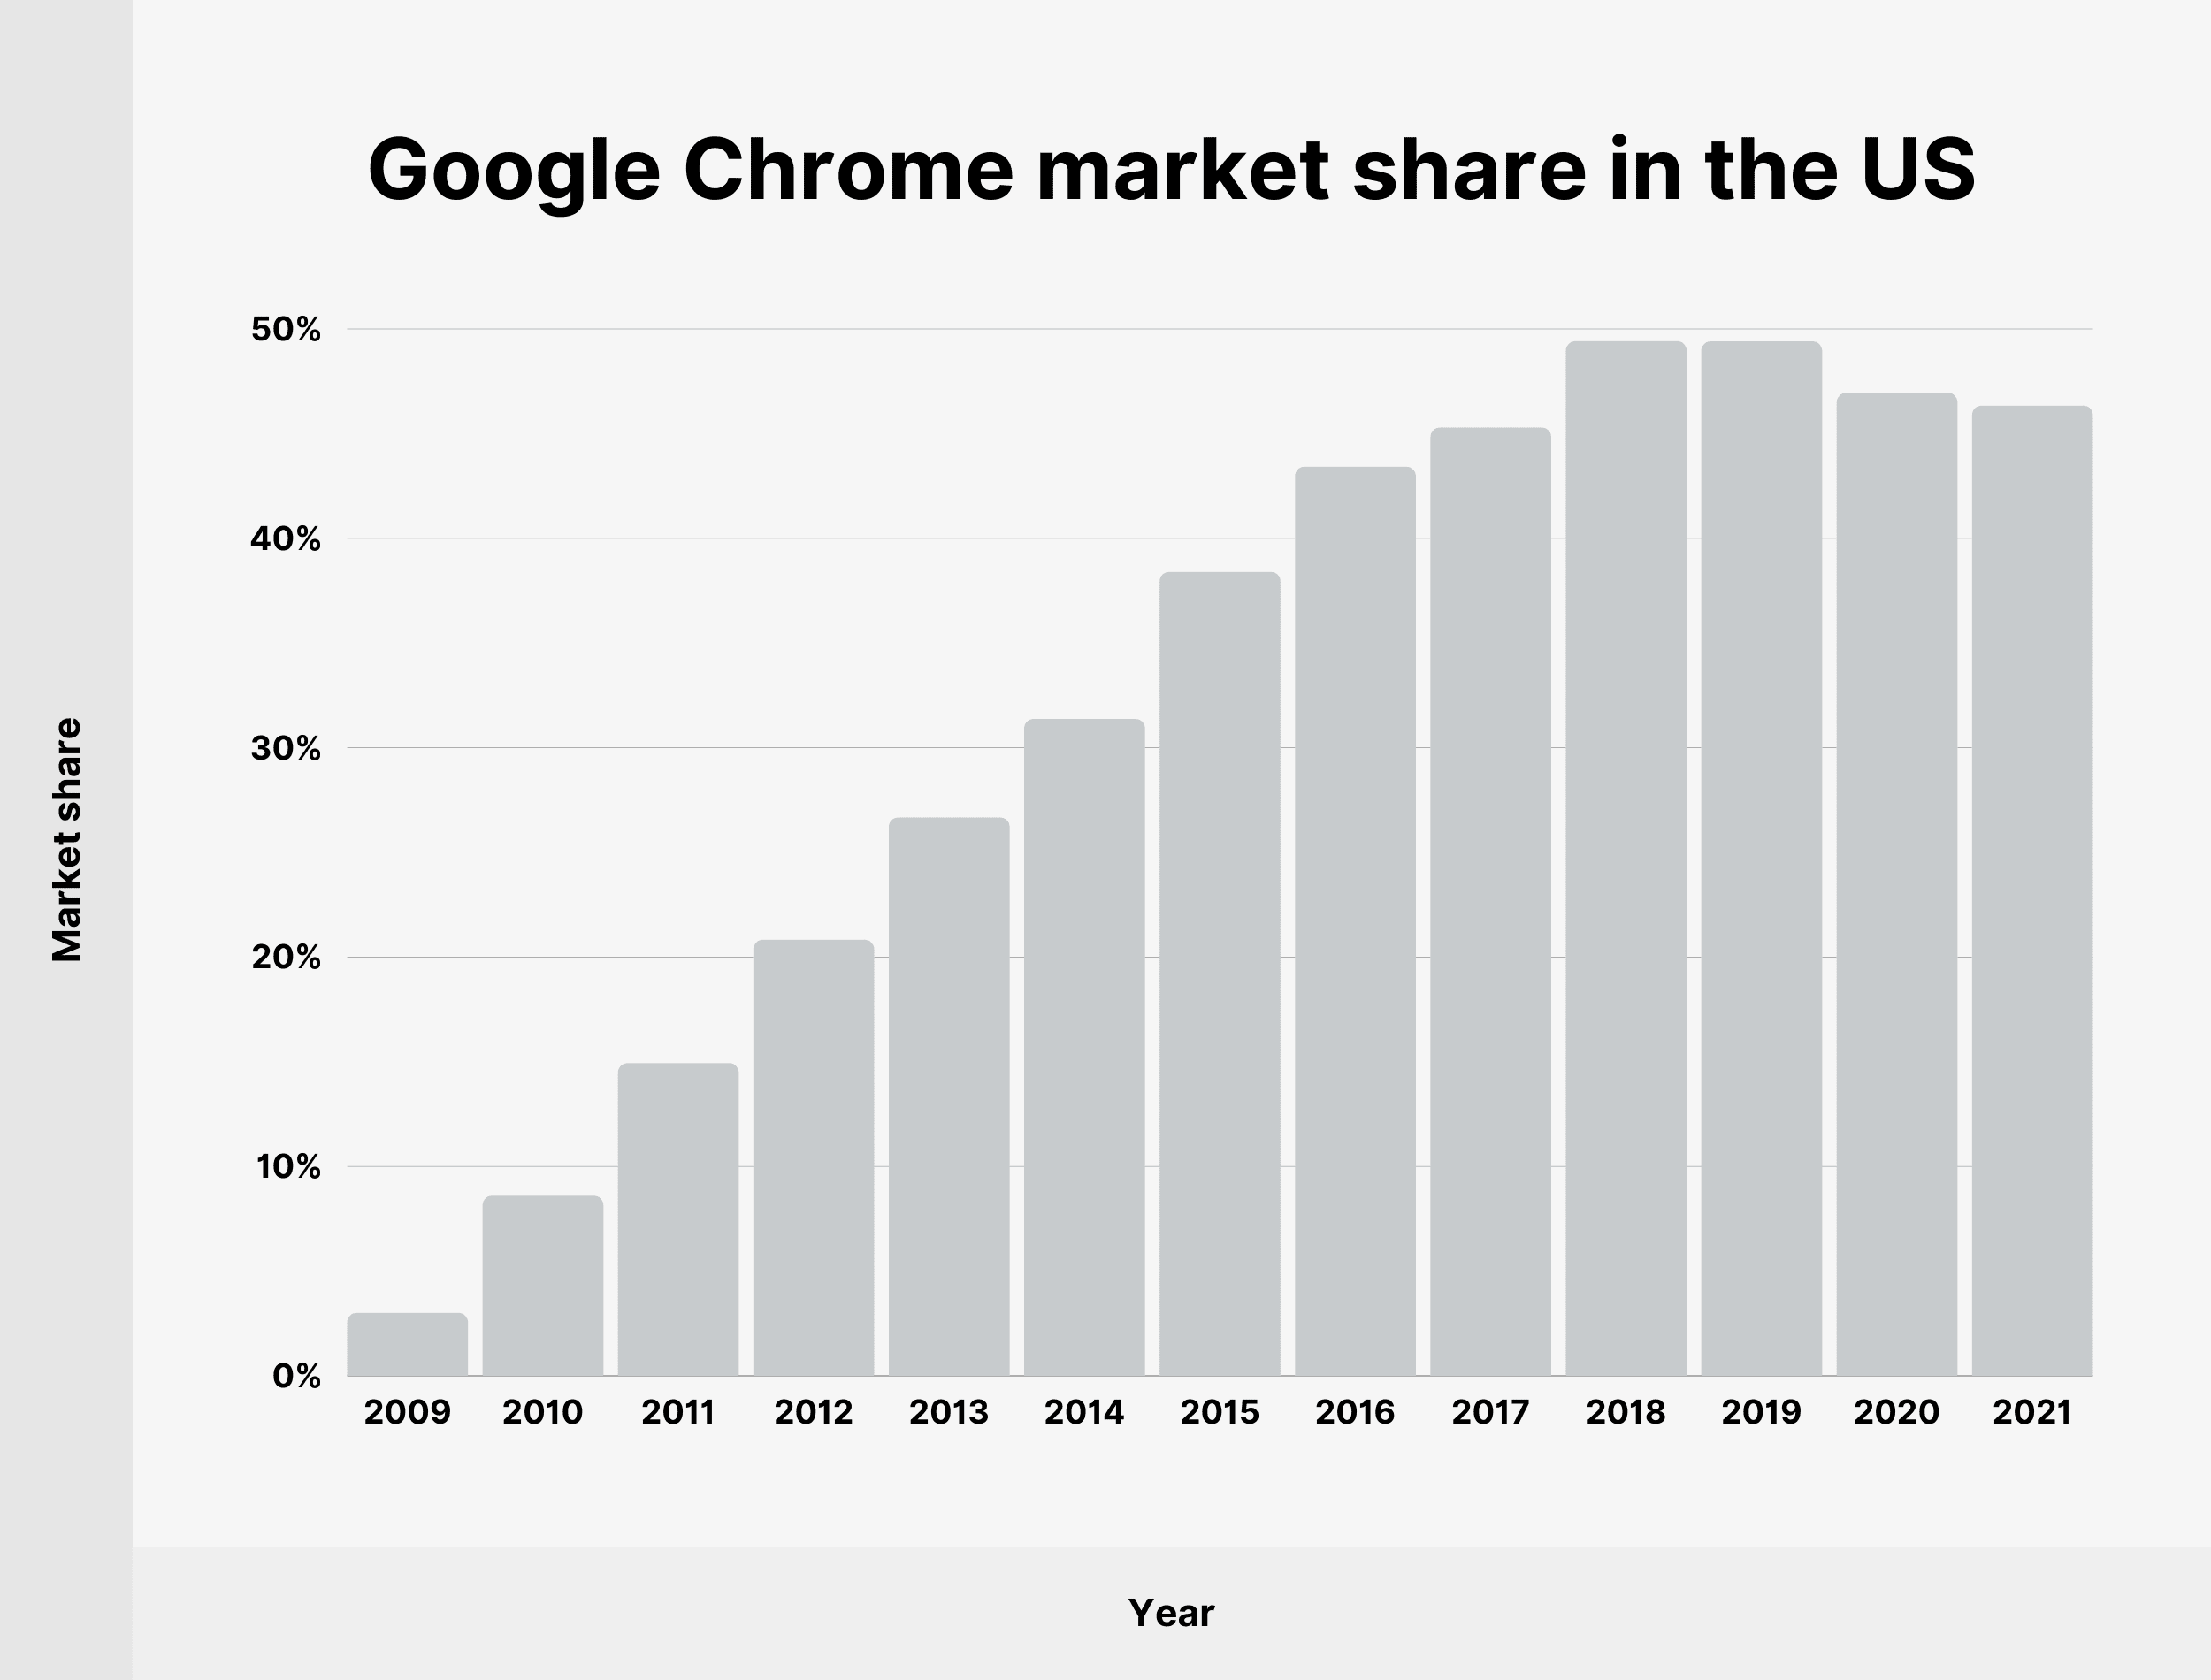 Google Chrome market share in the US